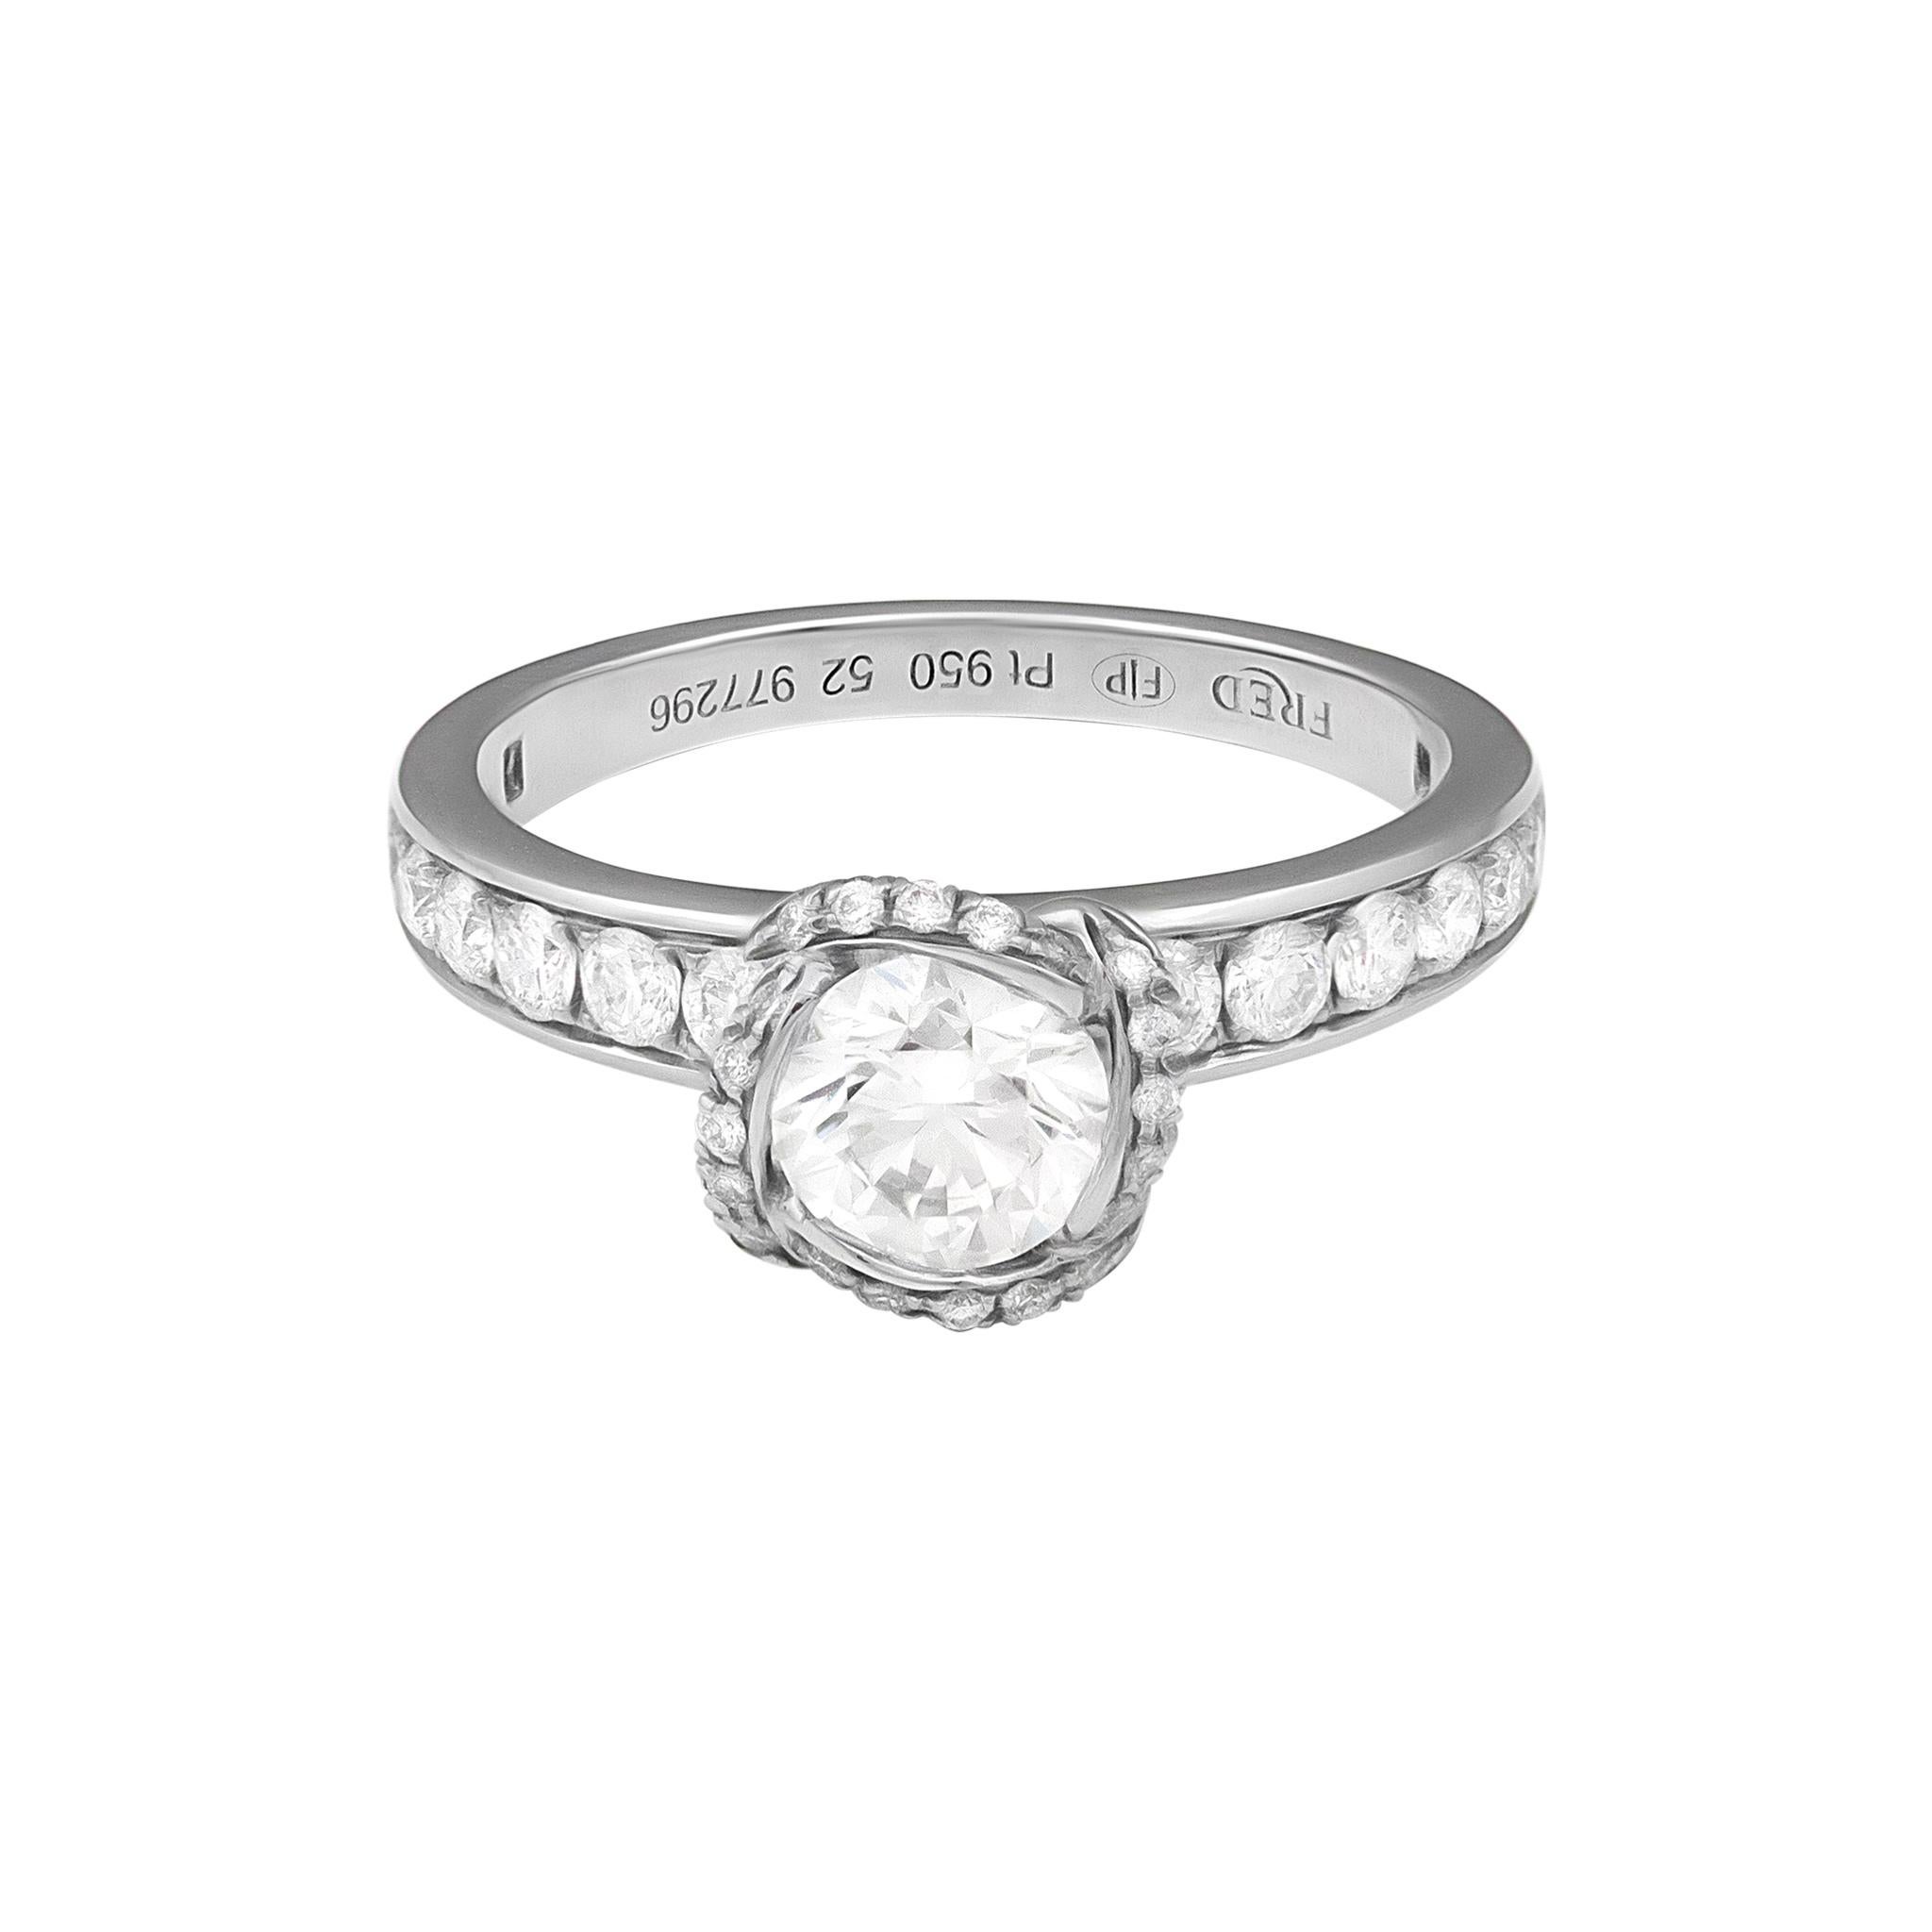 Total Diamond Weight: 1.23ct
Mounting Diamonds Weighing: 0.52ct
One Center Round Diamond Weighing: 0.71ct (GIA)
H-color, VS1 clarity
SKU: ECJ02561
Retail price: $9,450.00
